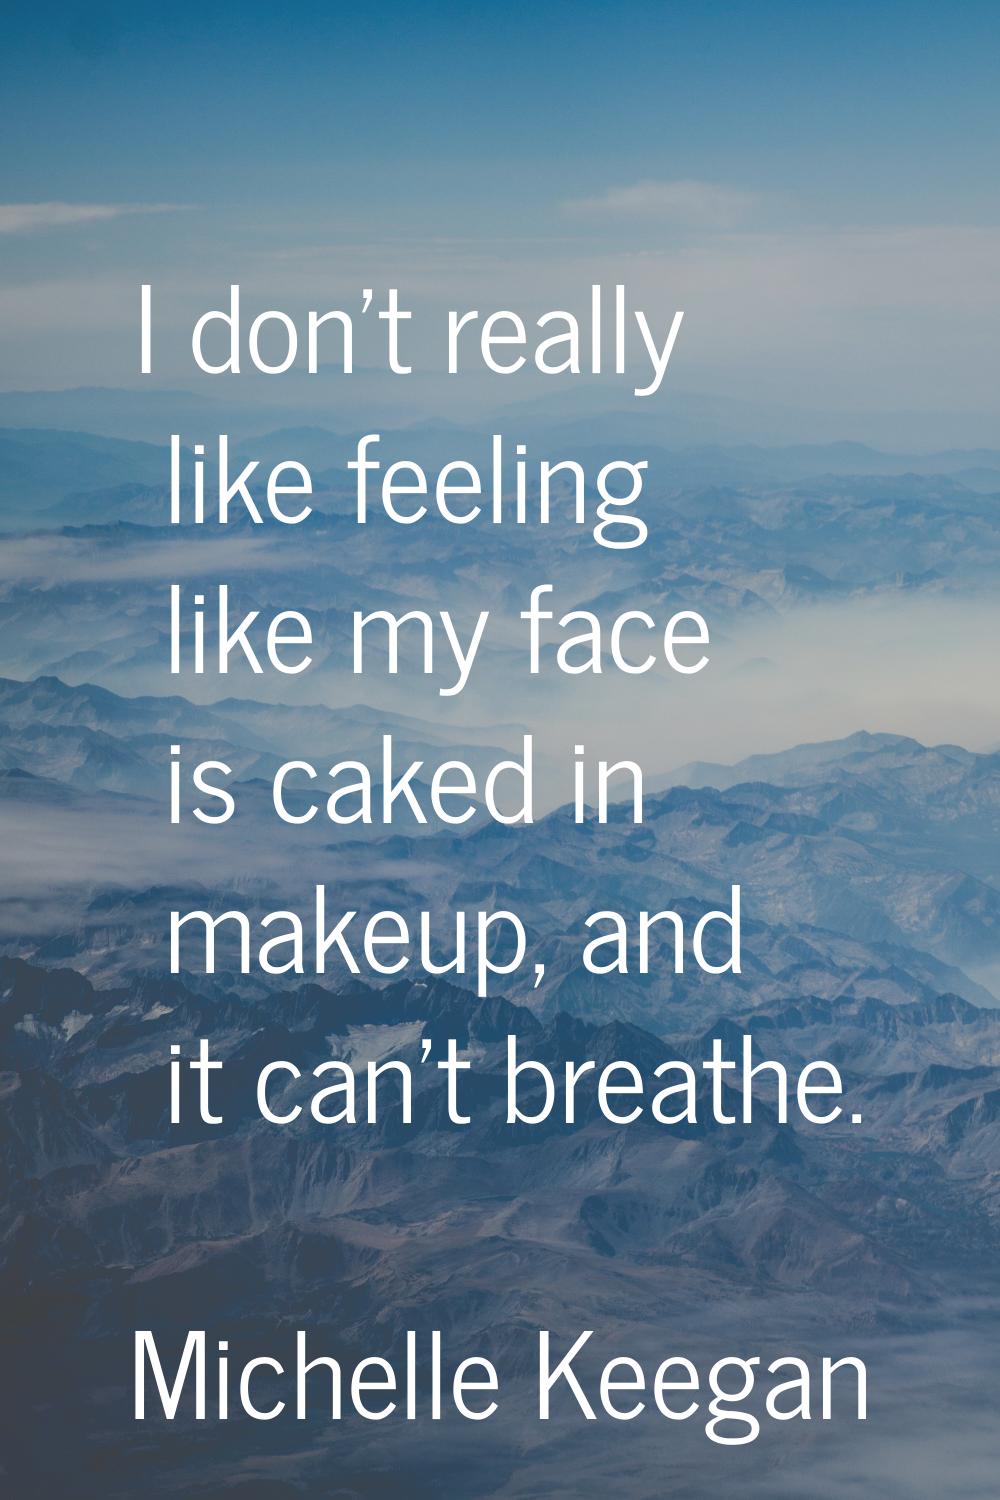 I don't really like feeling like my face is caked in makeup, and it can't breathe.